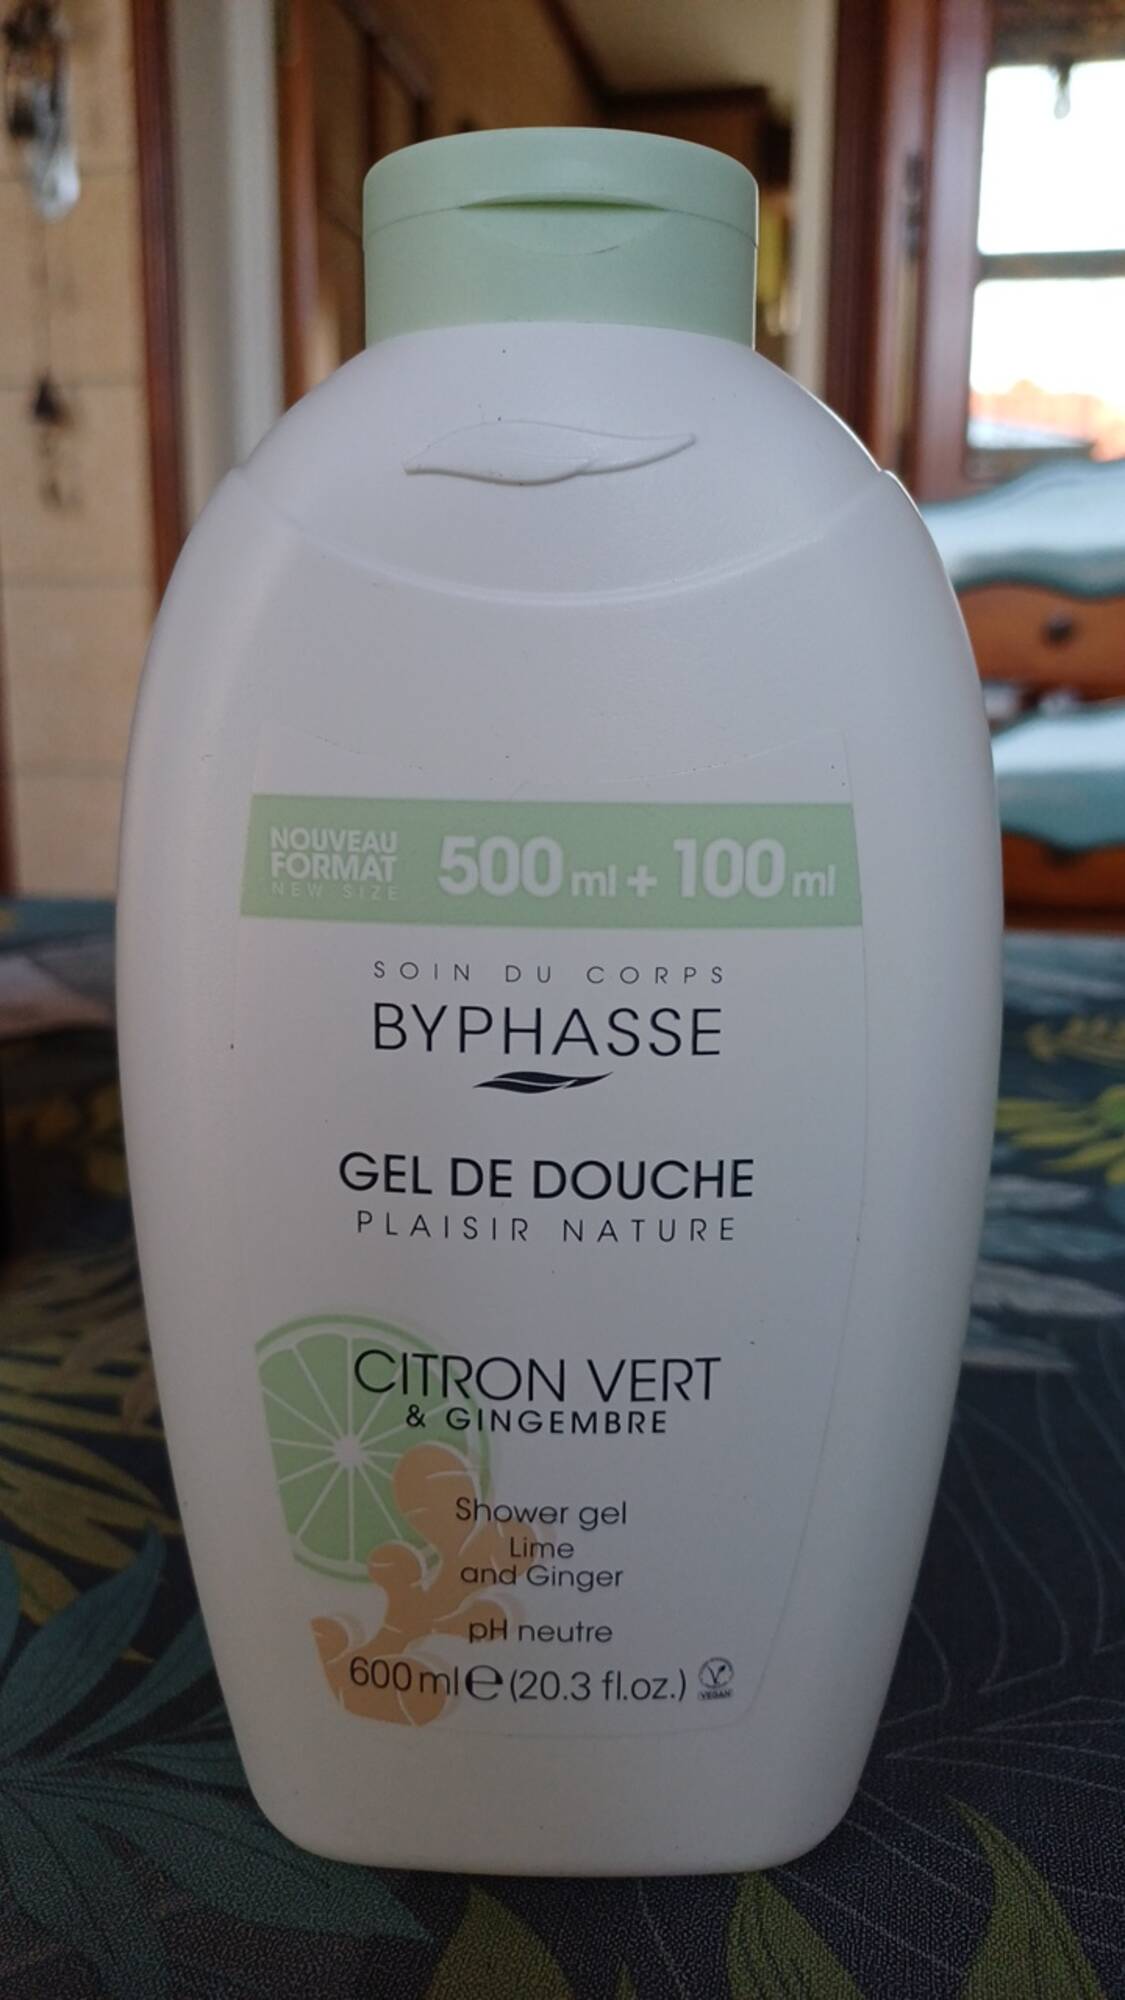 BYPHASSE - Citron vert & gingembre - Gel douche